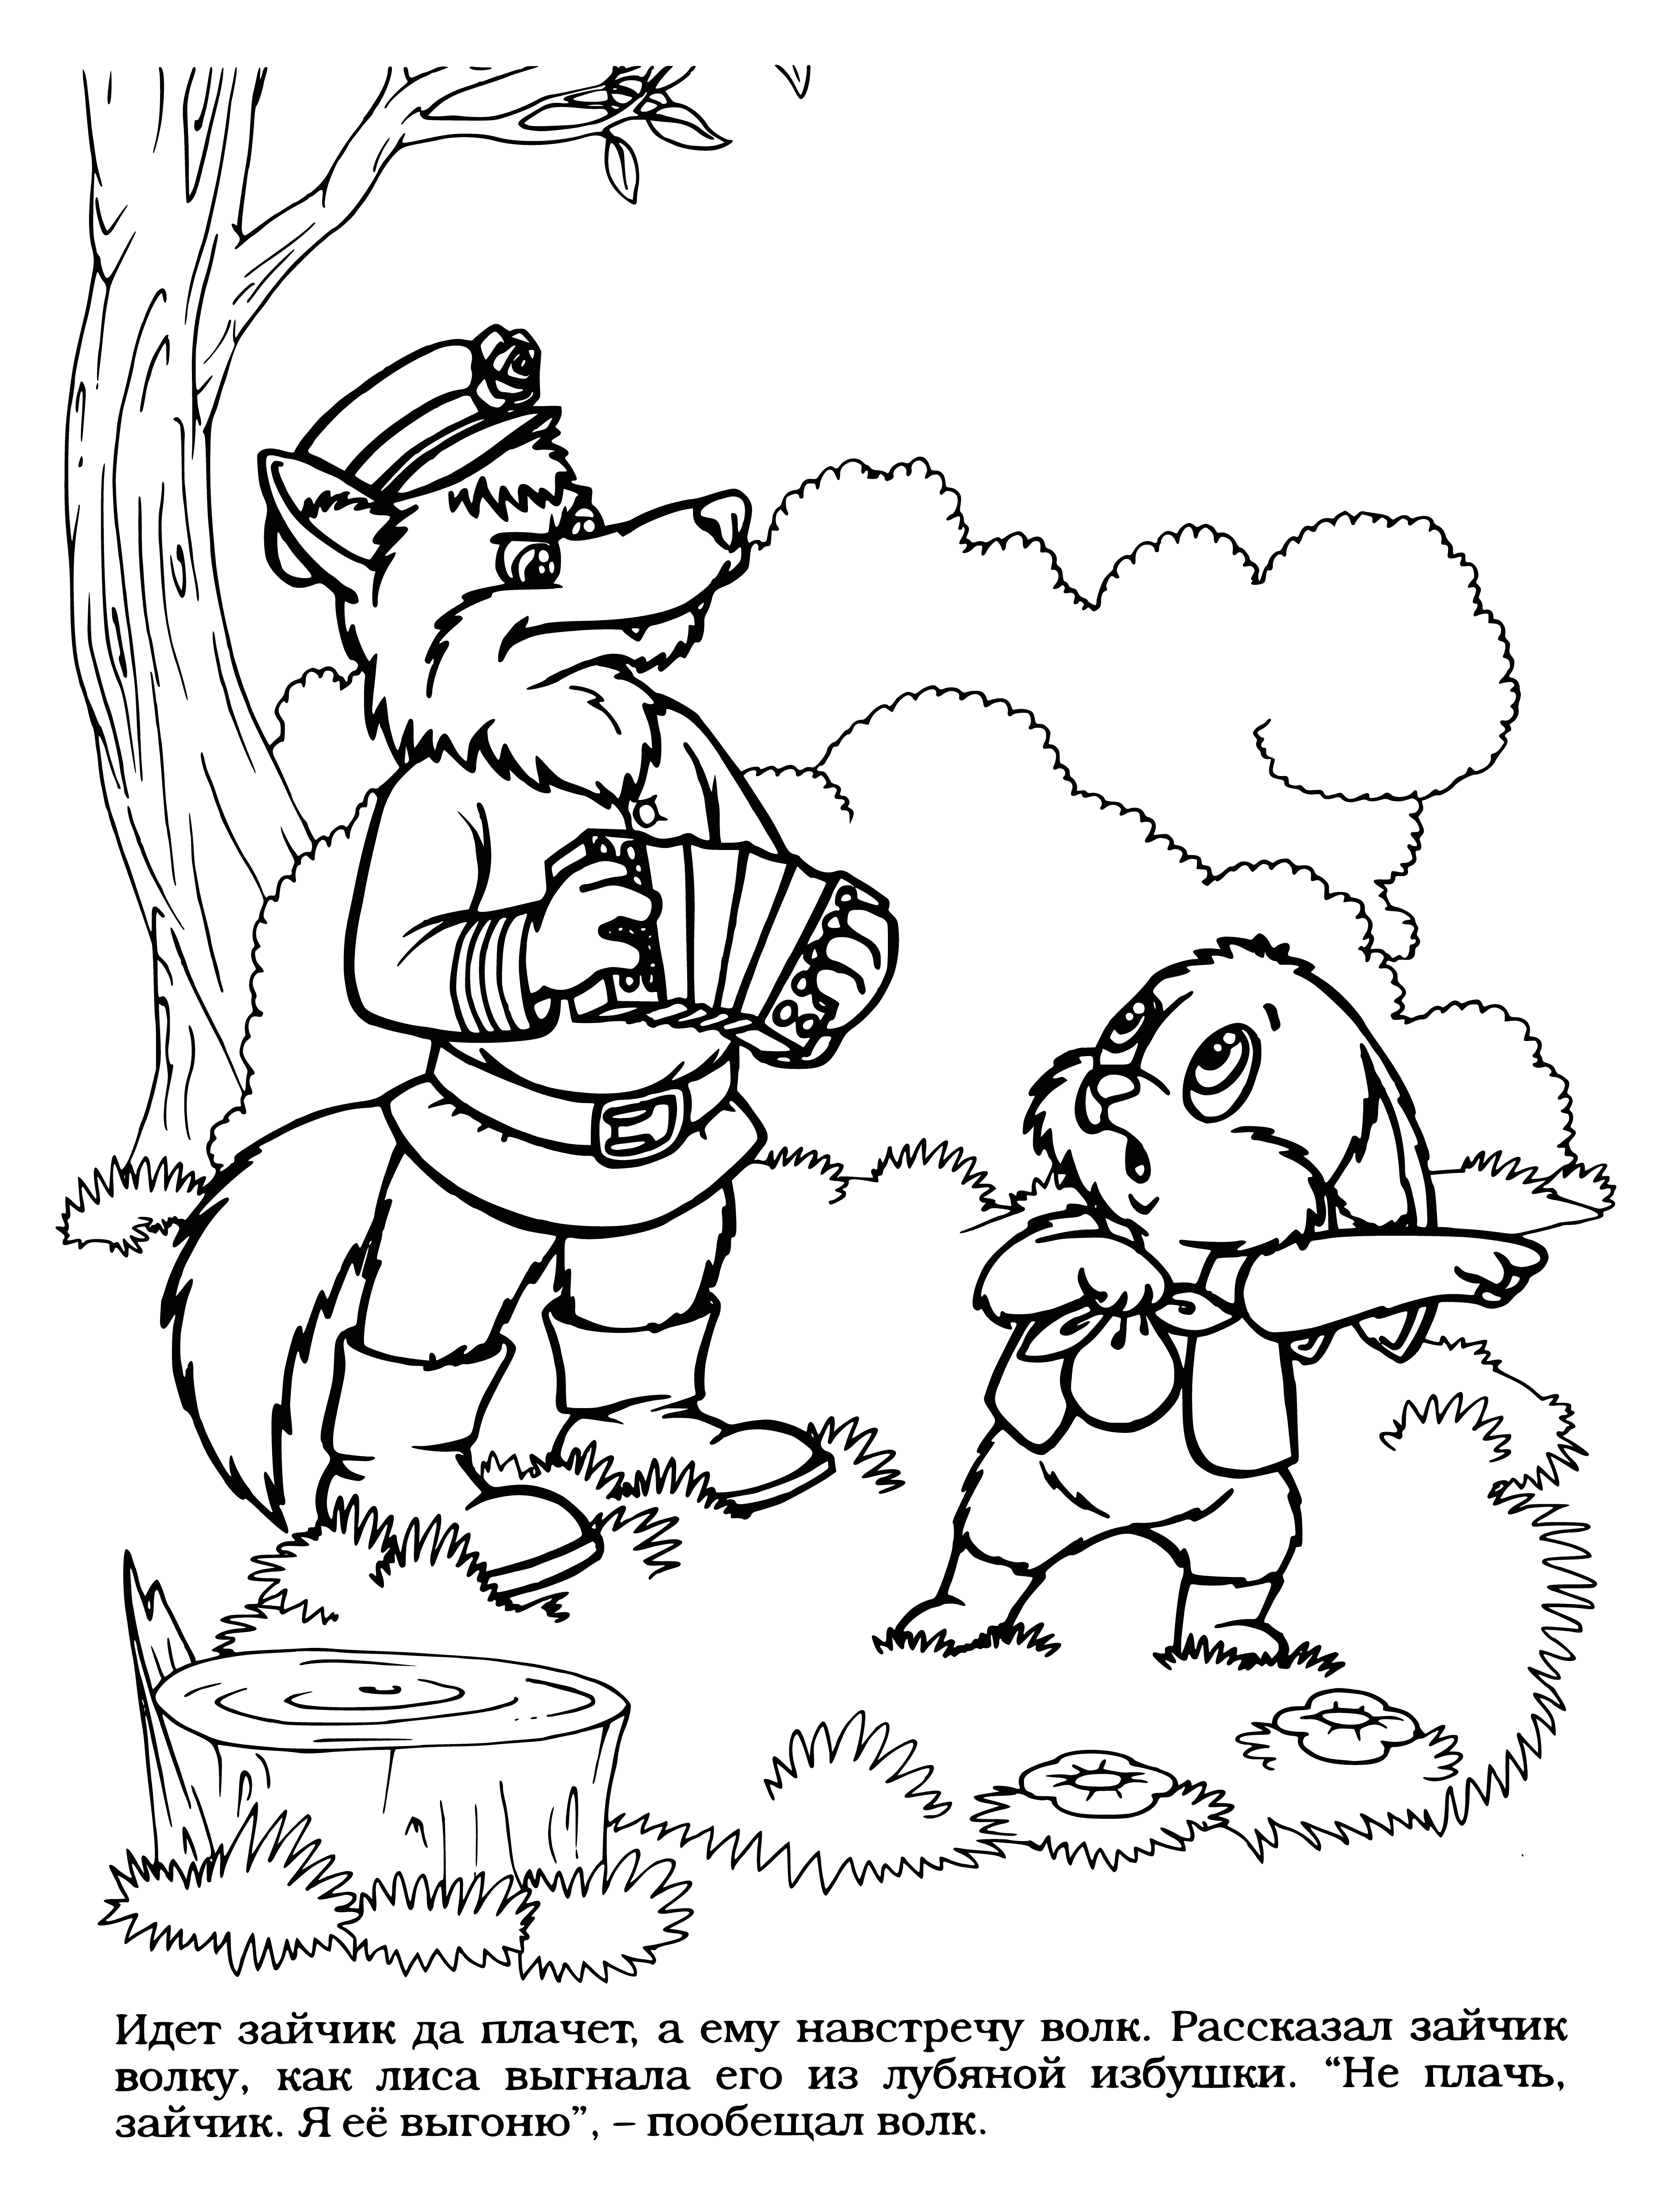 coloring page: Bunny walks away from Wolf in forest, Wolf walks towards Bunny.